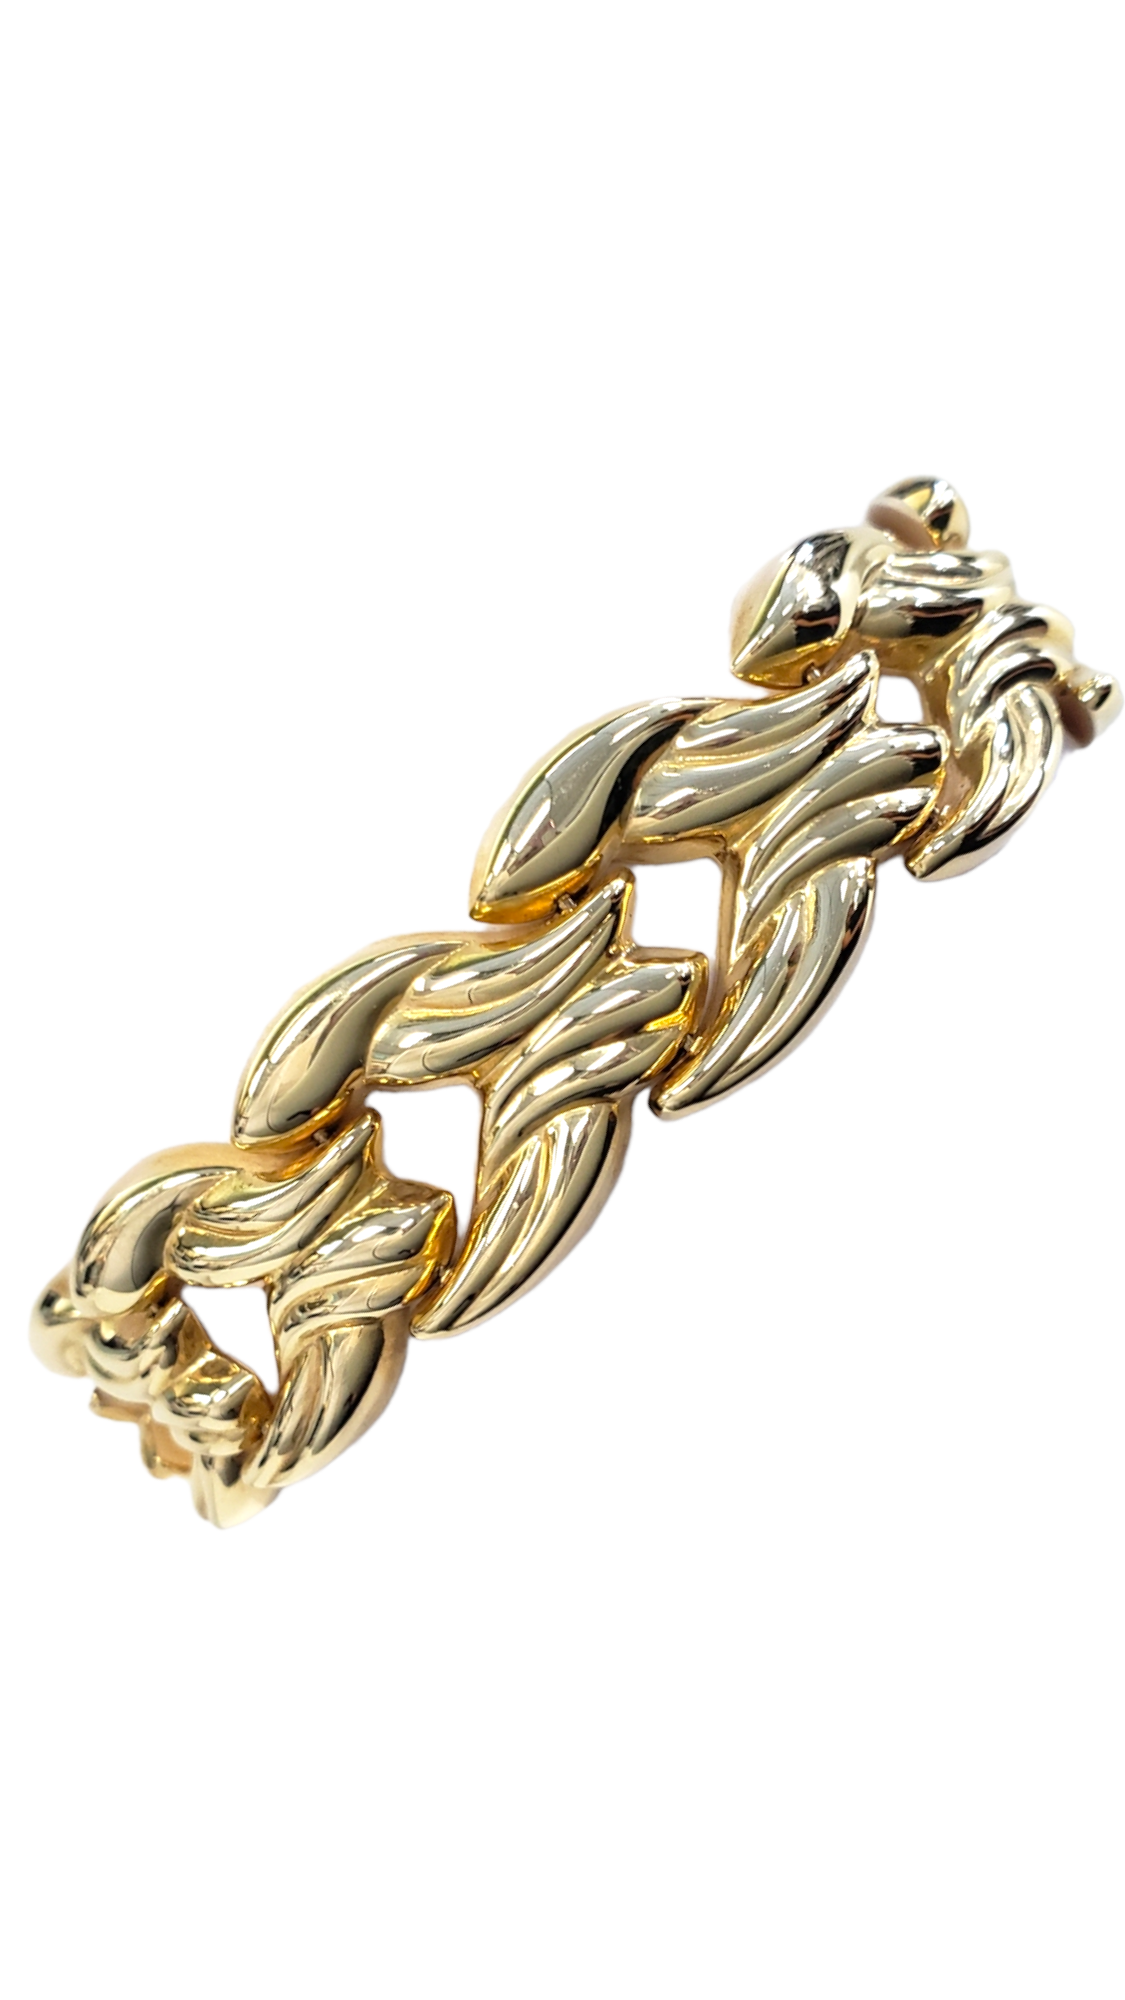 Fancy Style Thick Link Woman's Bracelet made in 14-Karat Yellow Gold